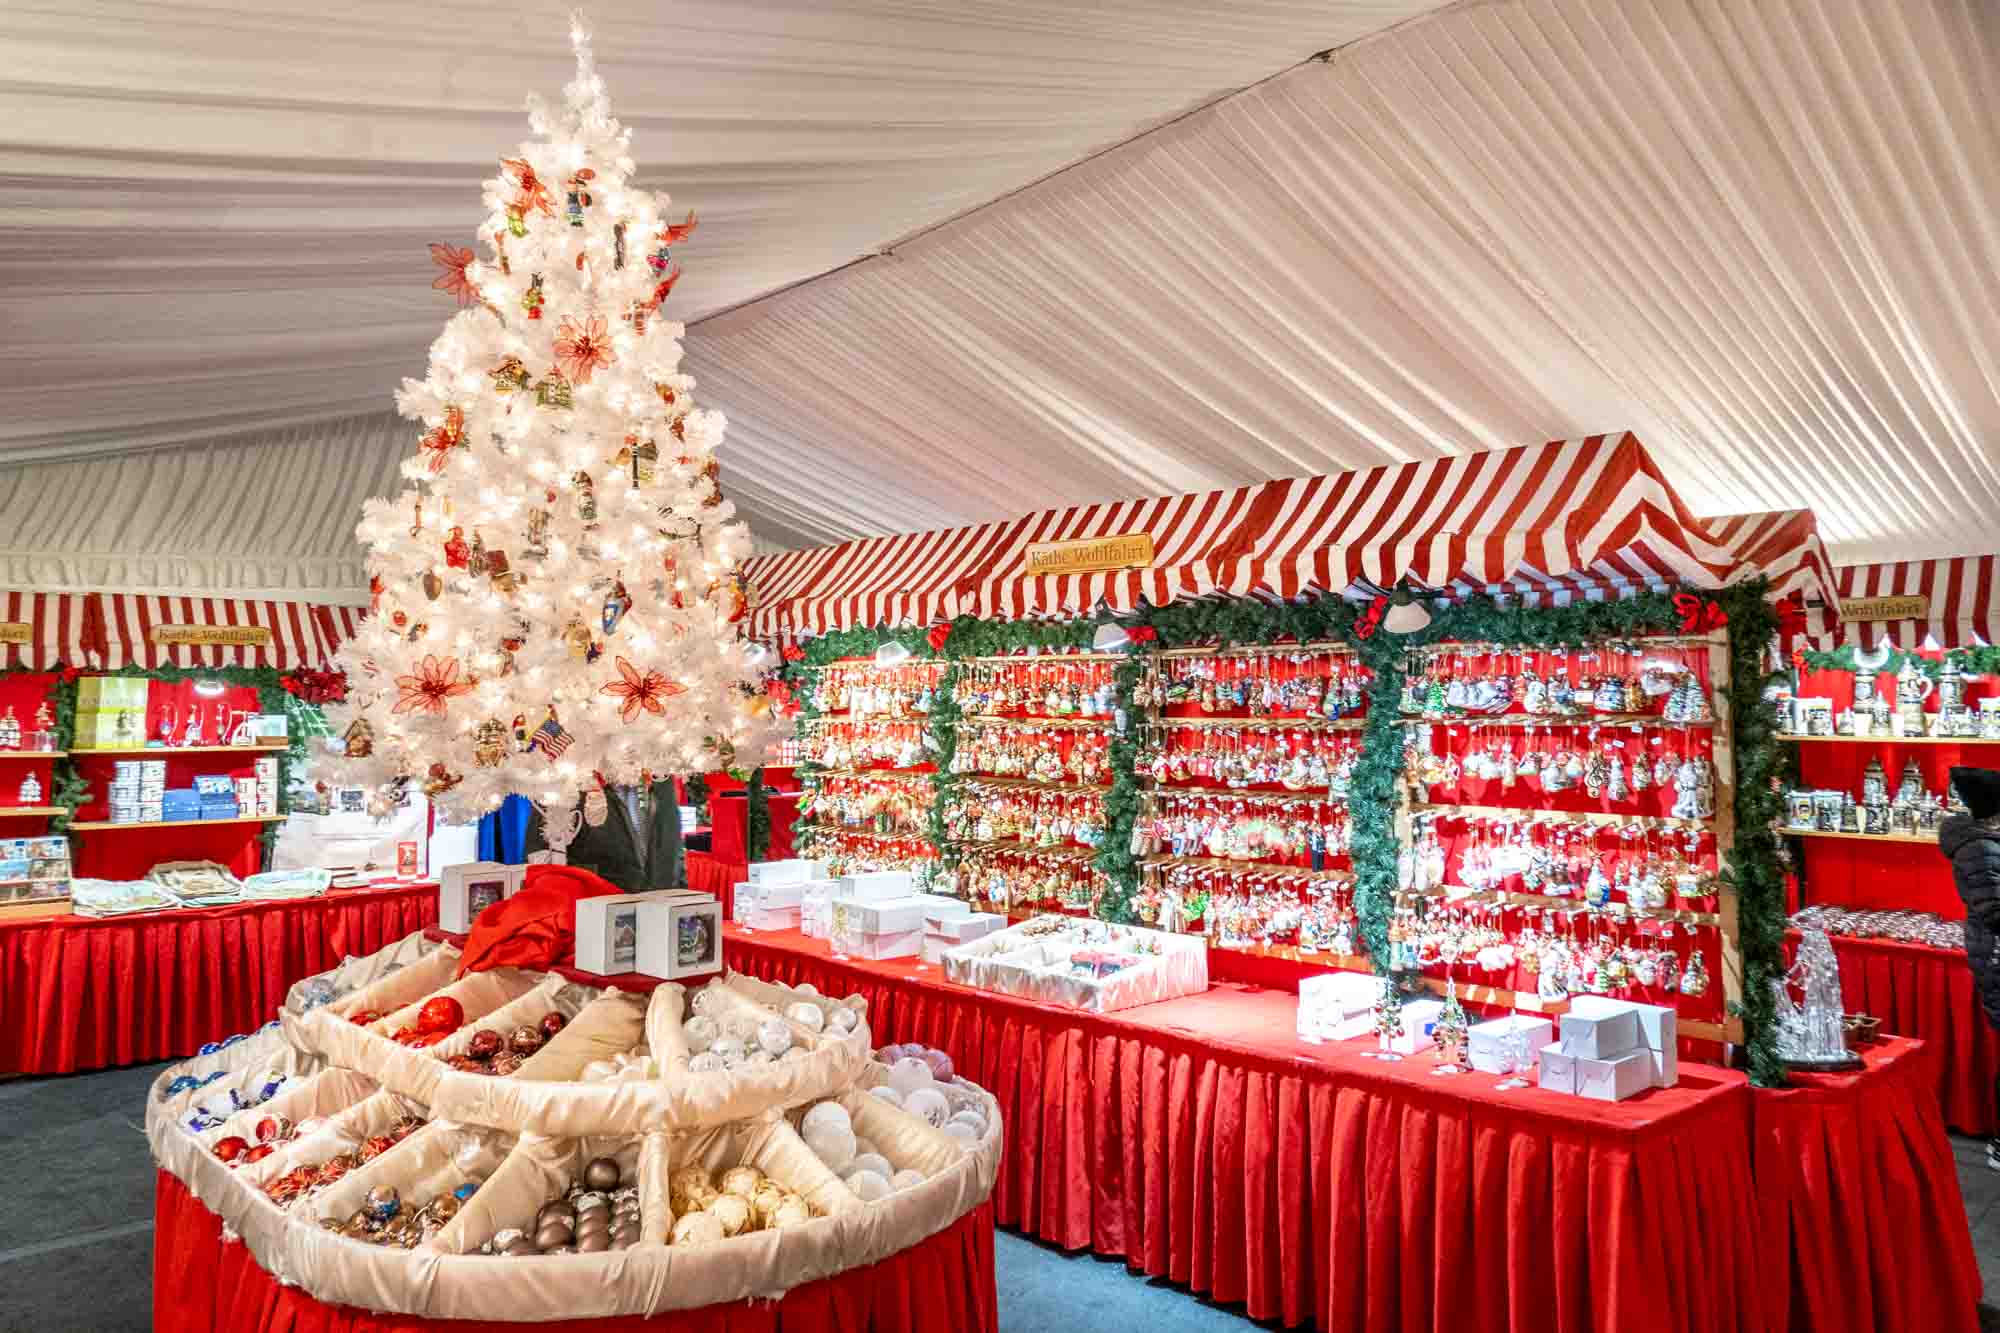 Rows of hanging ornaments for sale and a white Christmas tree under a tent.